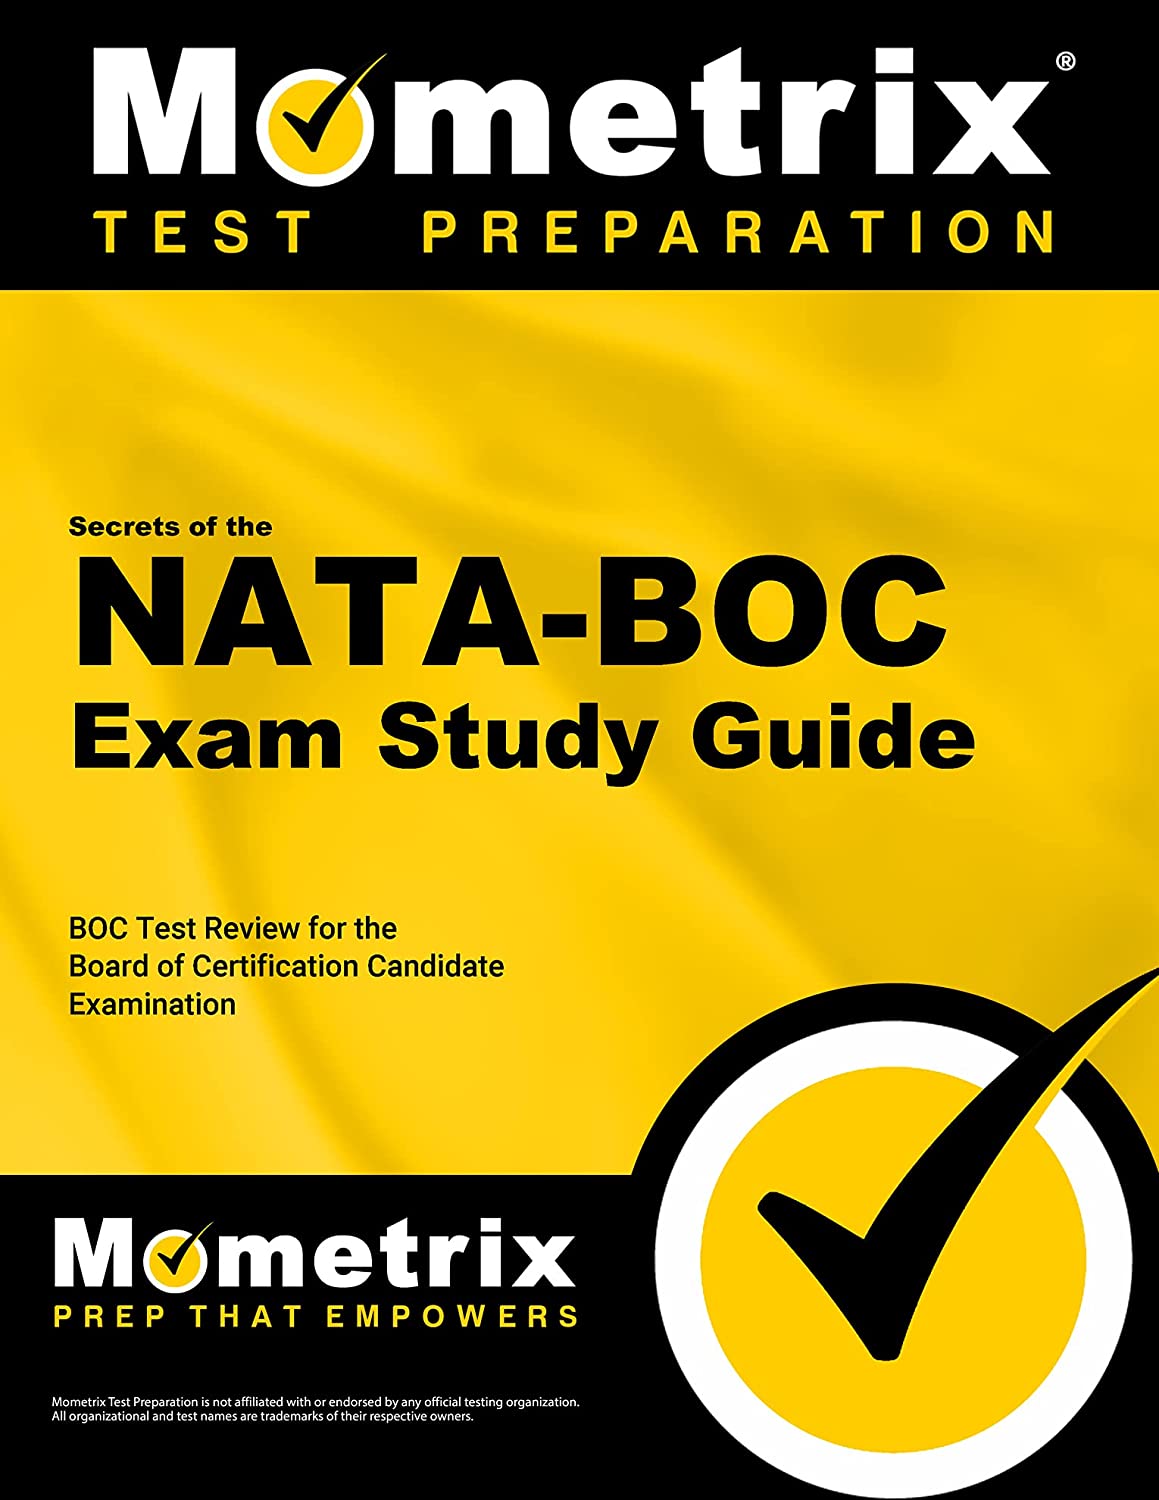 Secrets of the NATA-BOC Exam Study Guide: NATA-BOC Test Review for the Board of Certification Candidate Examination